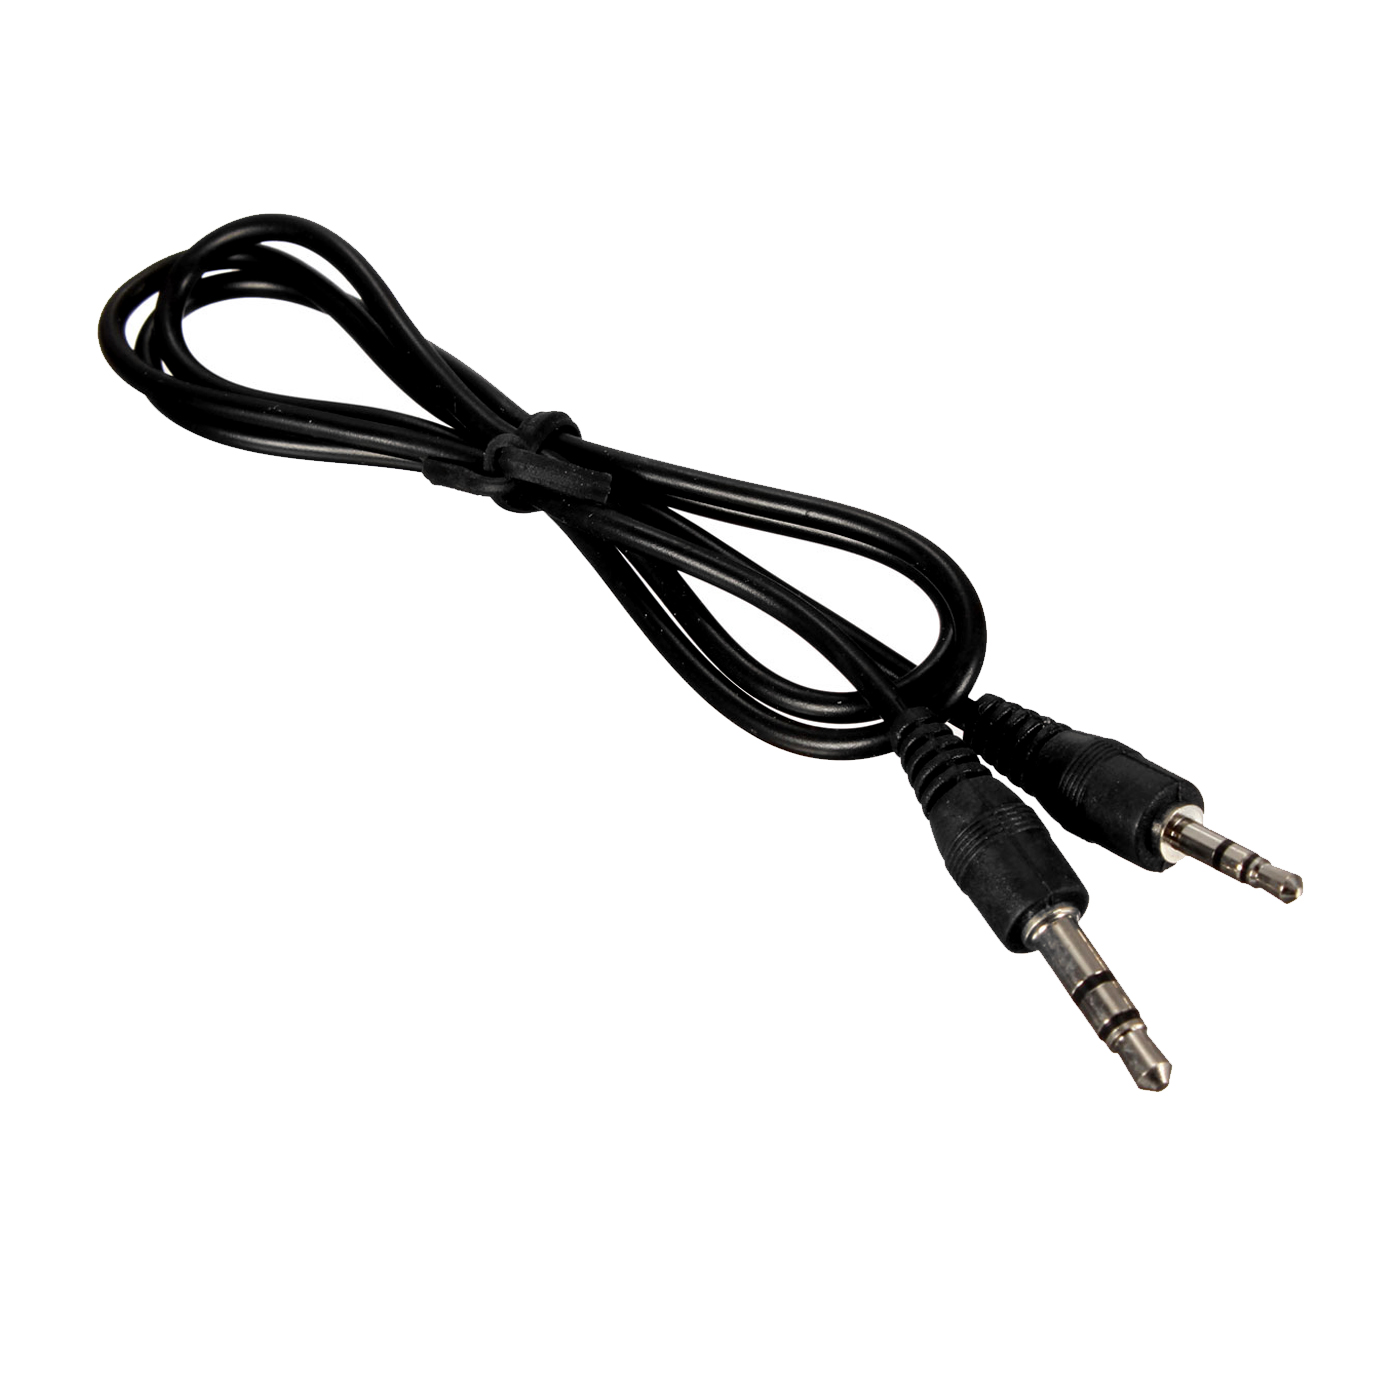 Aux Cable Audio Lead 3.5mm Jack to Jack Stere Male for PC phone MP3iPod UK 